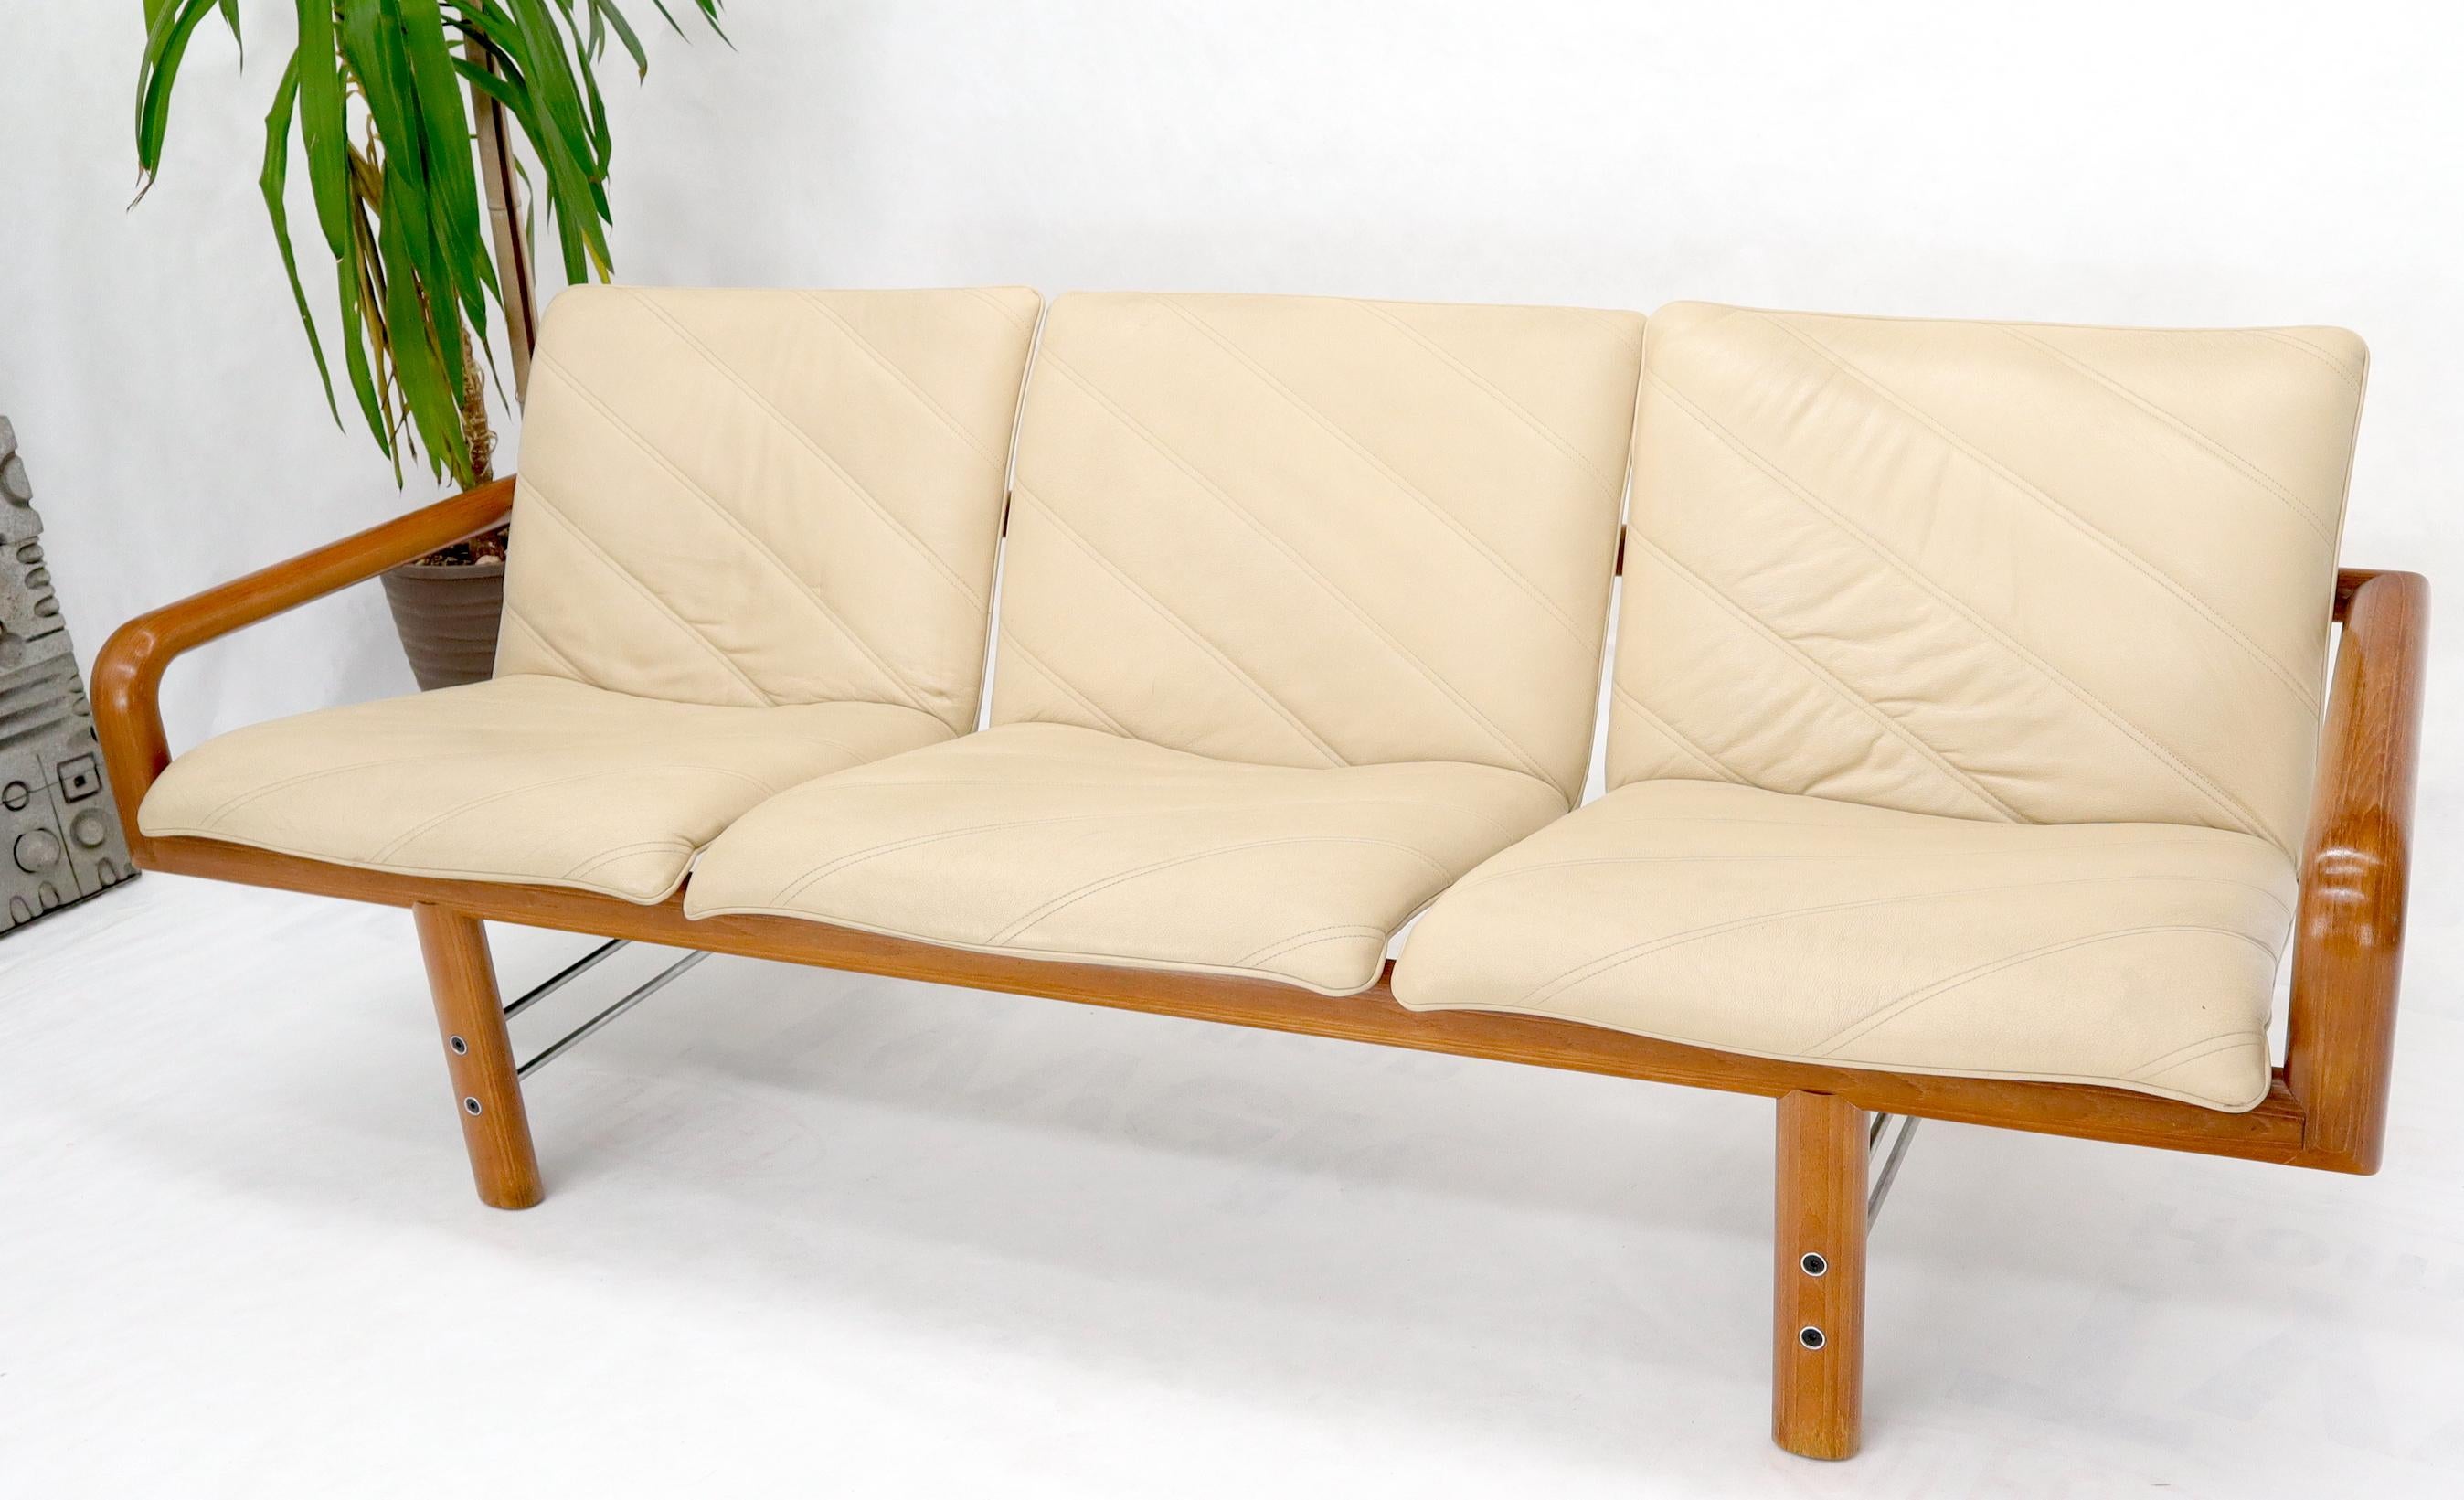 Leather and Teak Midcentury Danish Modern Floating Sofa In Good Condition For Sale In Rockaway, NJ